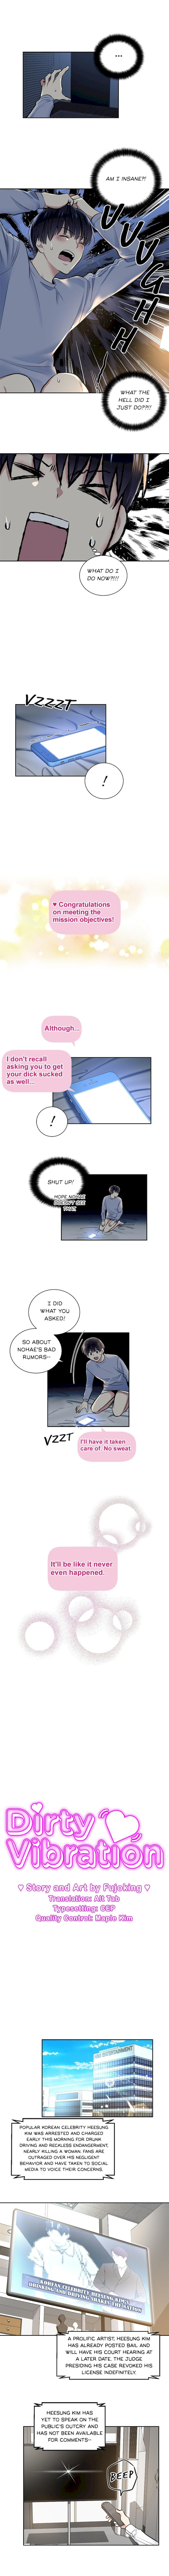 Shame Application - Chapter 9 Page 2